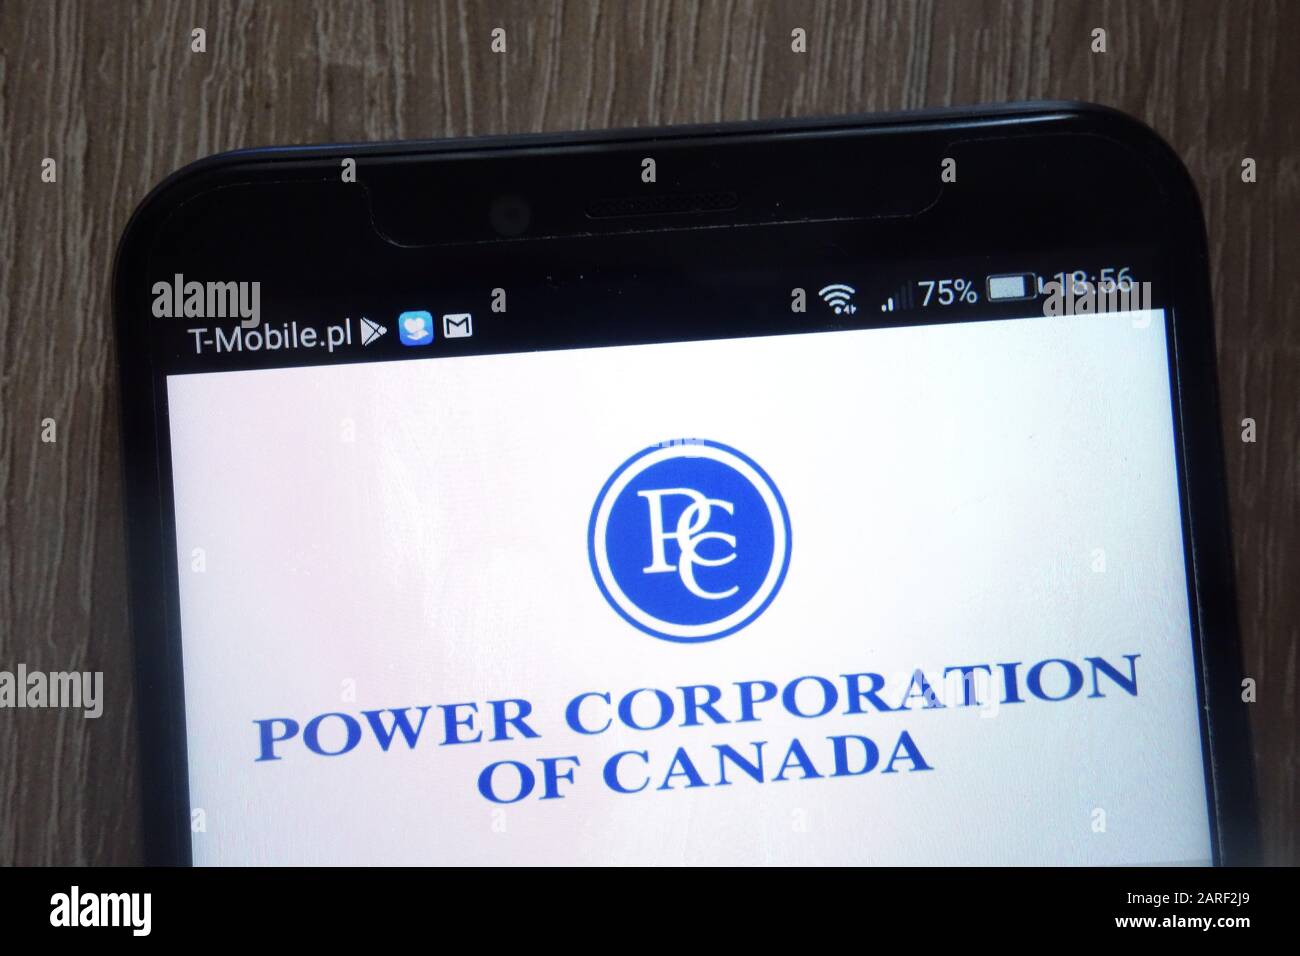 Power Corporation of Canada logo displayed on a modern smartphone Stock Photo